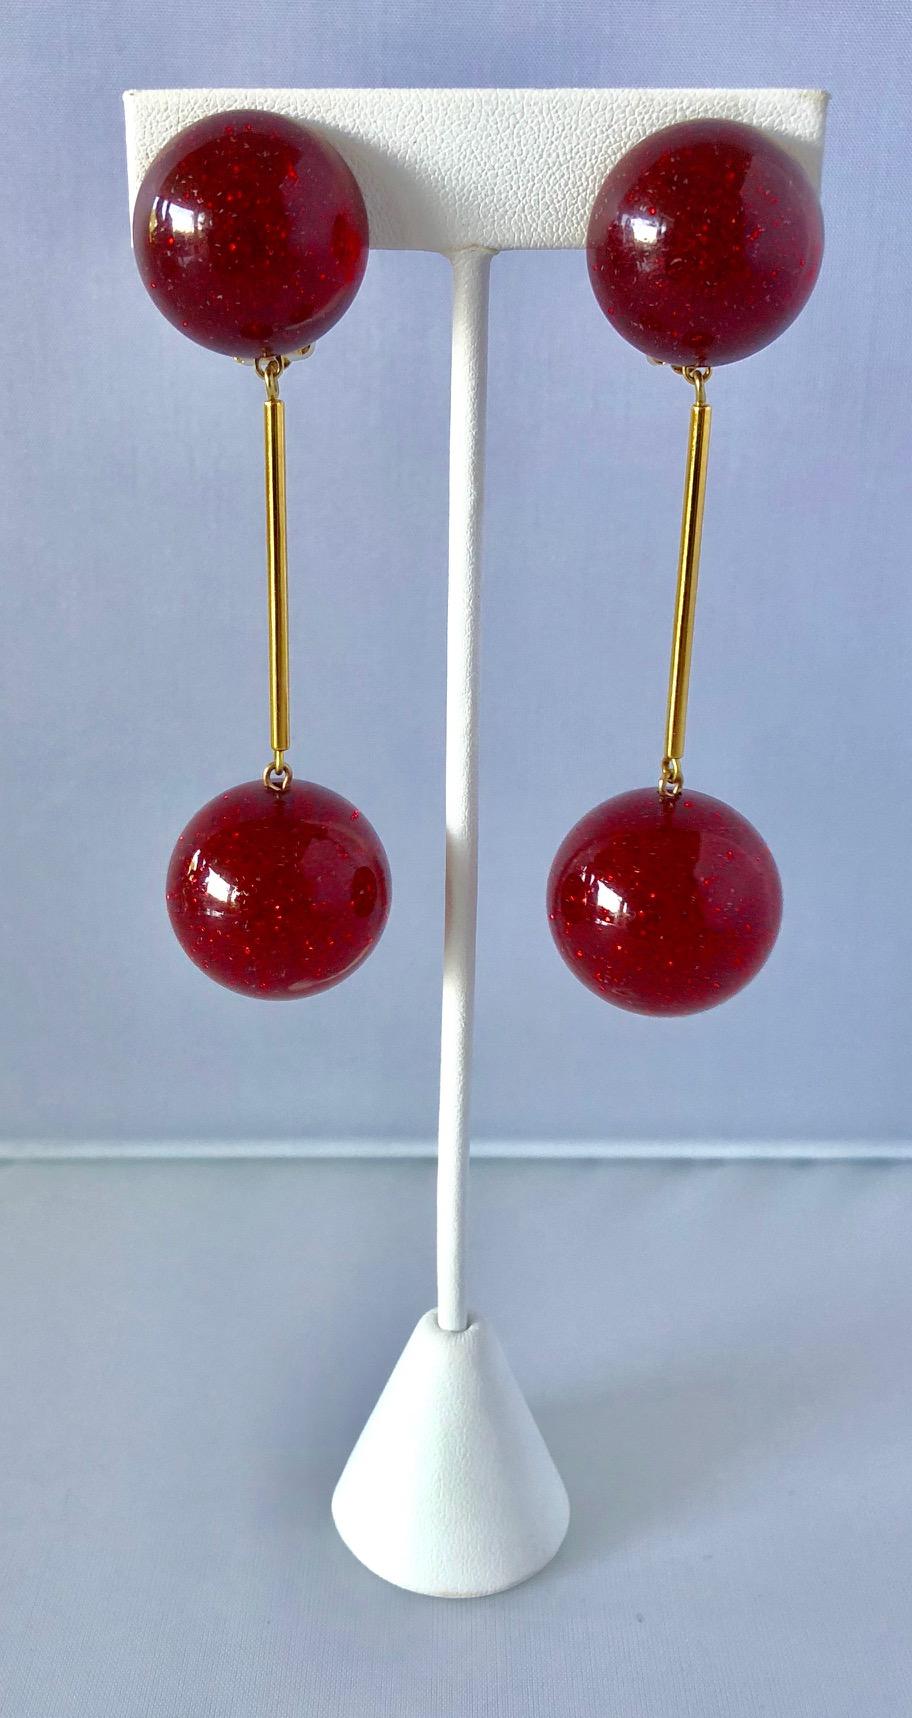 Women's Vintage French Red Stardust Mod Ball Statement Earrings 